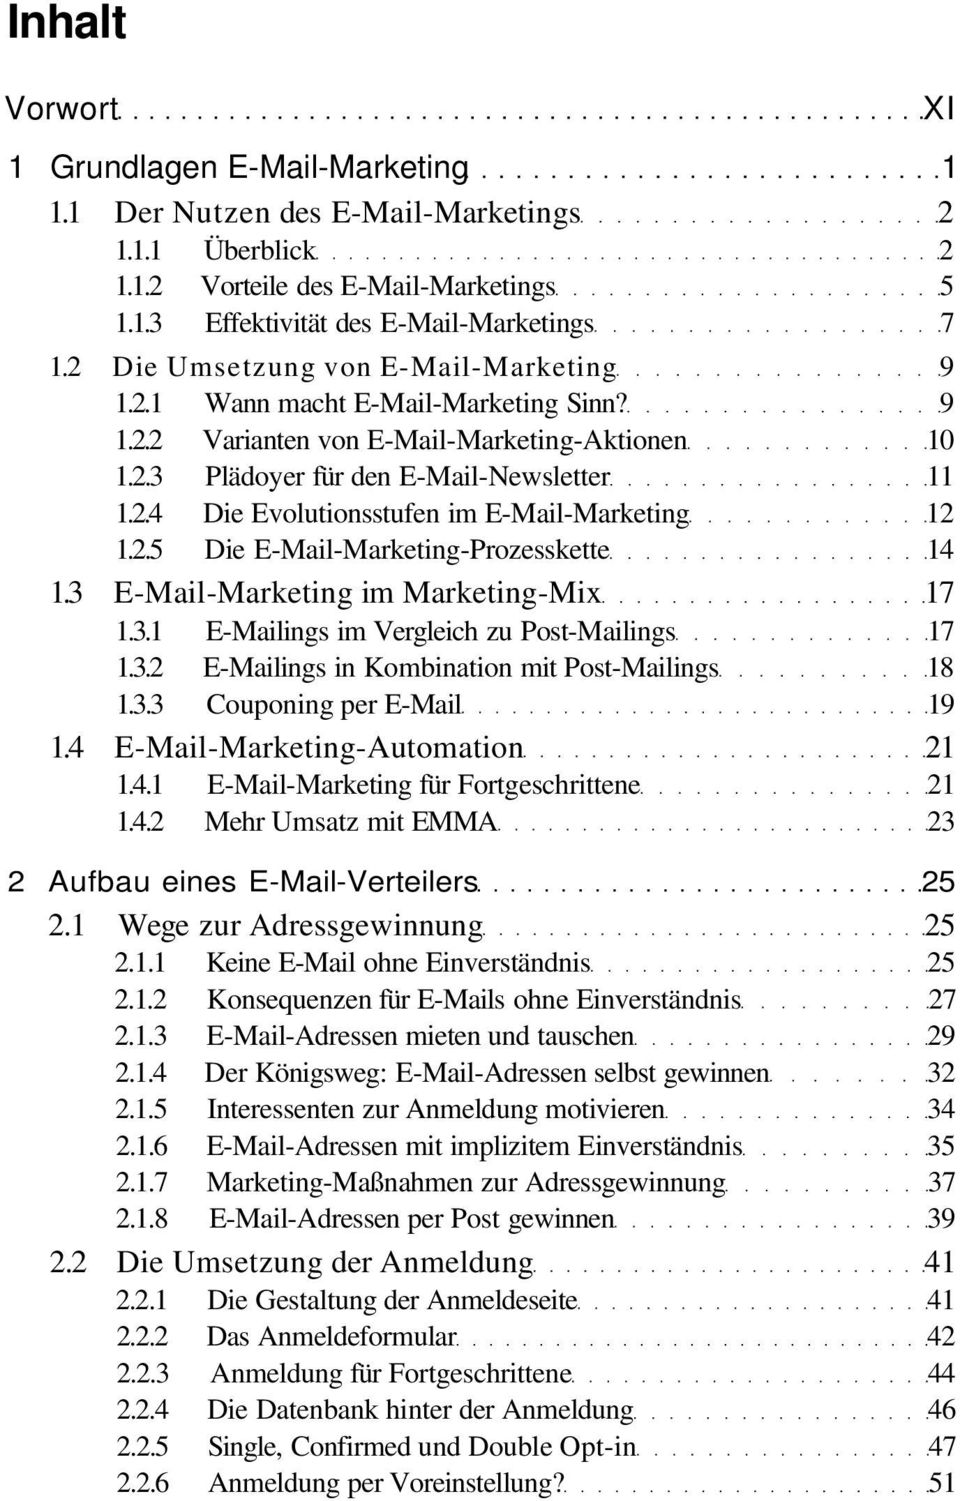 2.5 Die E-Mail-Marketing-Prozesskette 14 1.3 E-Mail-Marketing im Marketing-Mix 17 1.3.1 E-Mailings im Vergleich zu Post-Mailings 17 1.3.2 E-Mailings in Kombination mit Post-Mailings 18 1.3.3 Couponing per E-Mail 19 1.